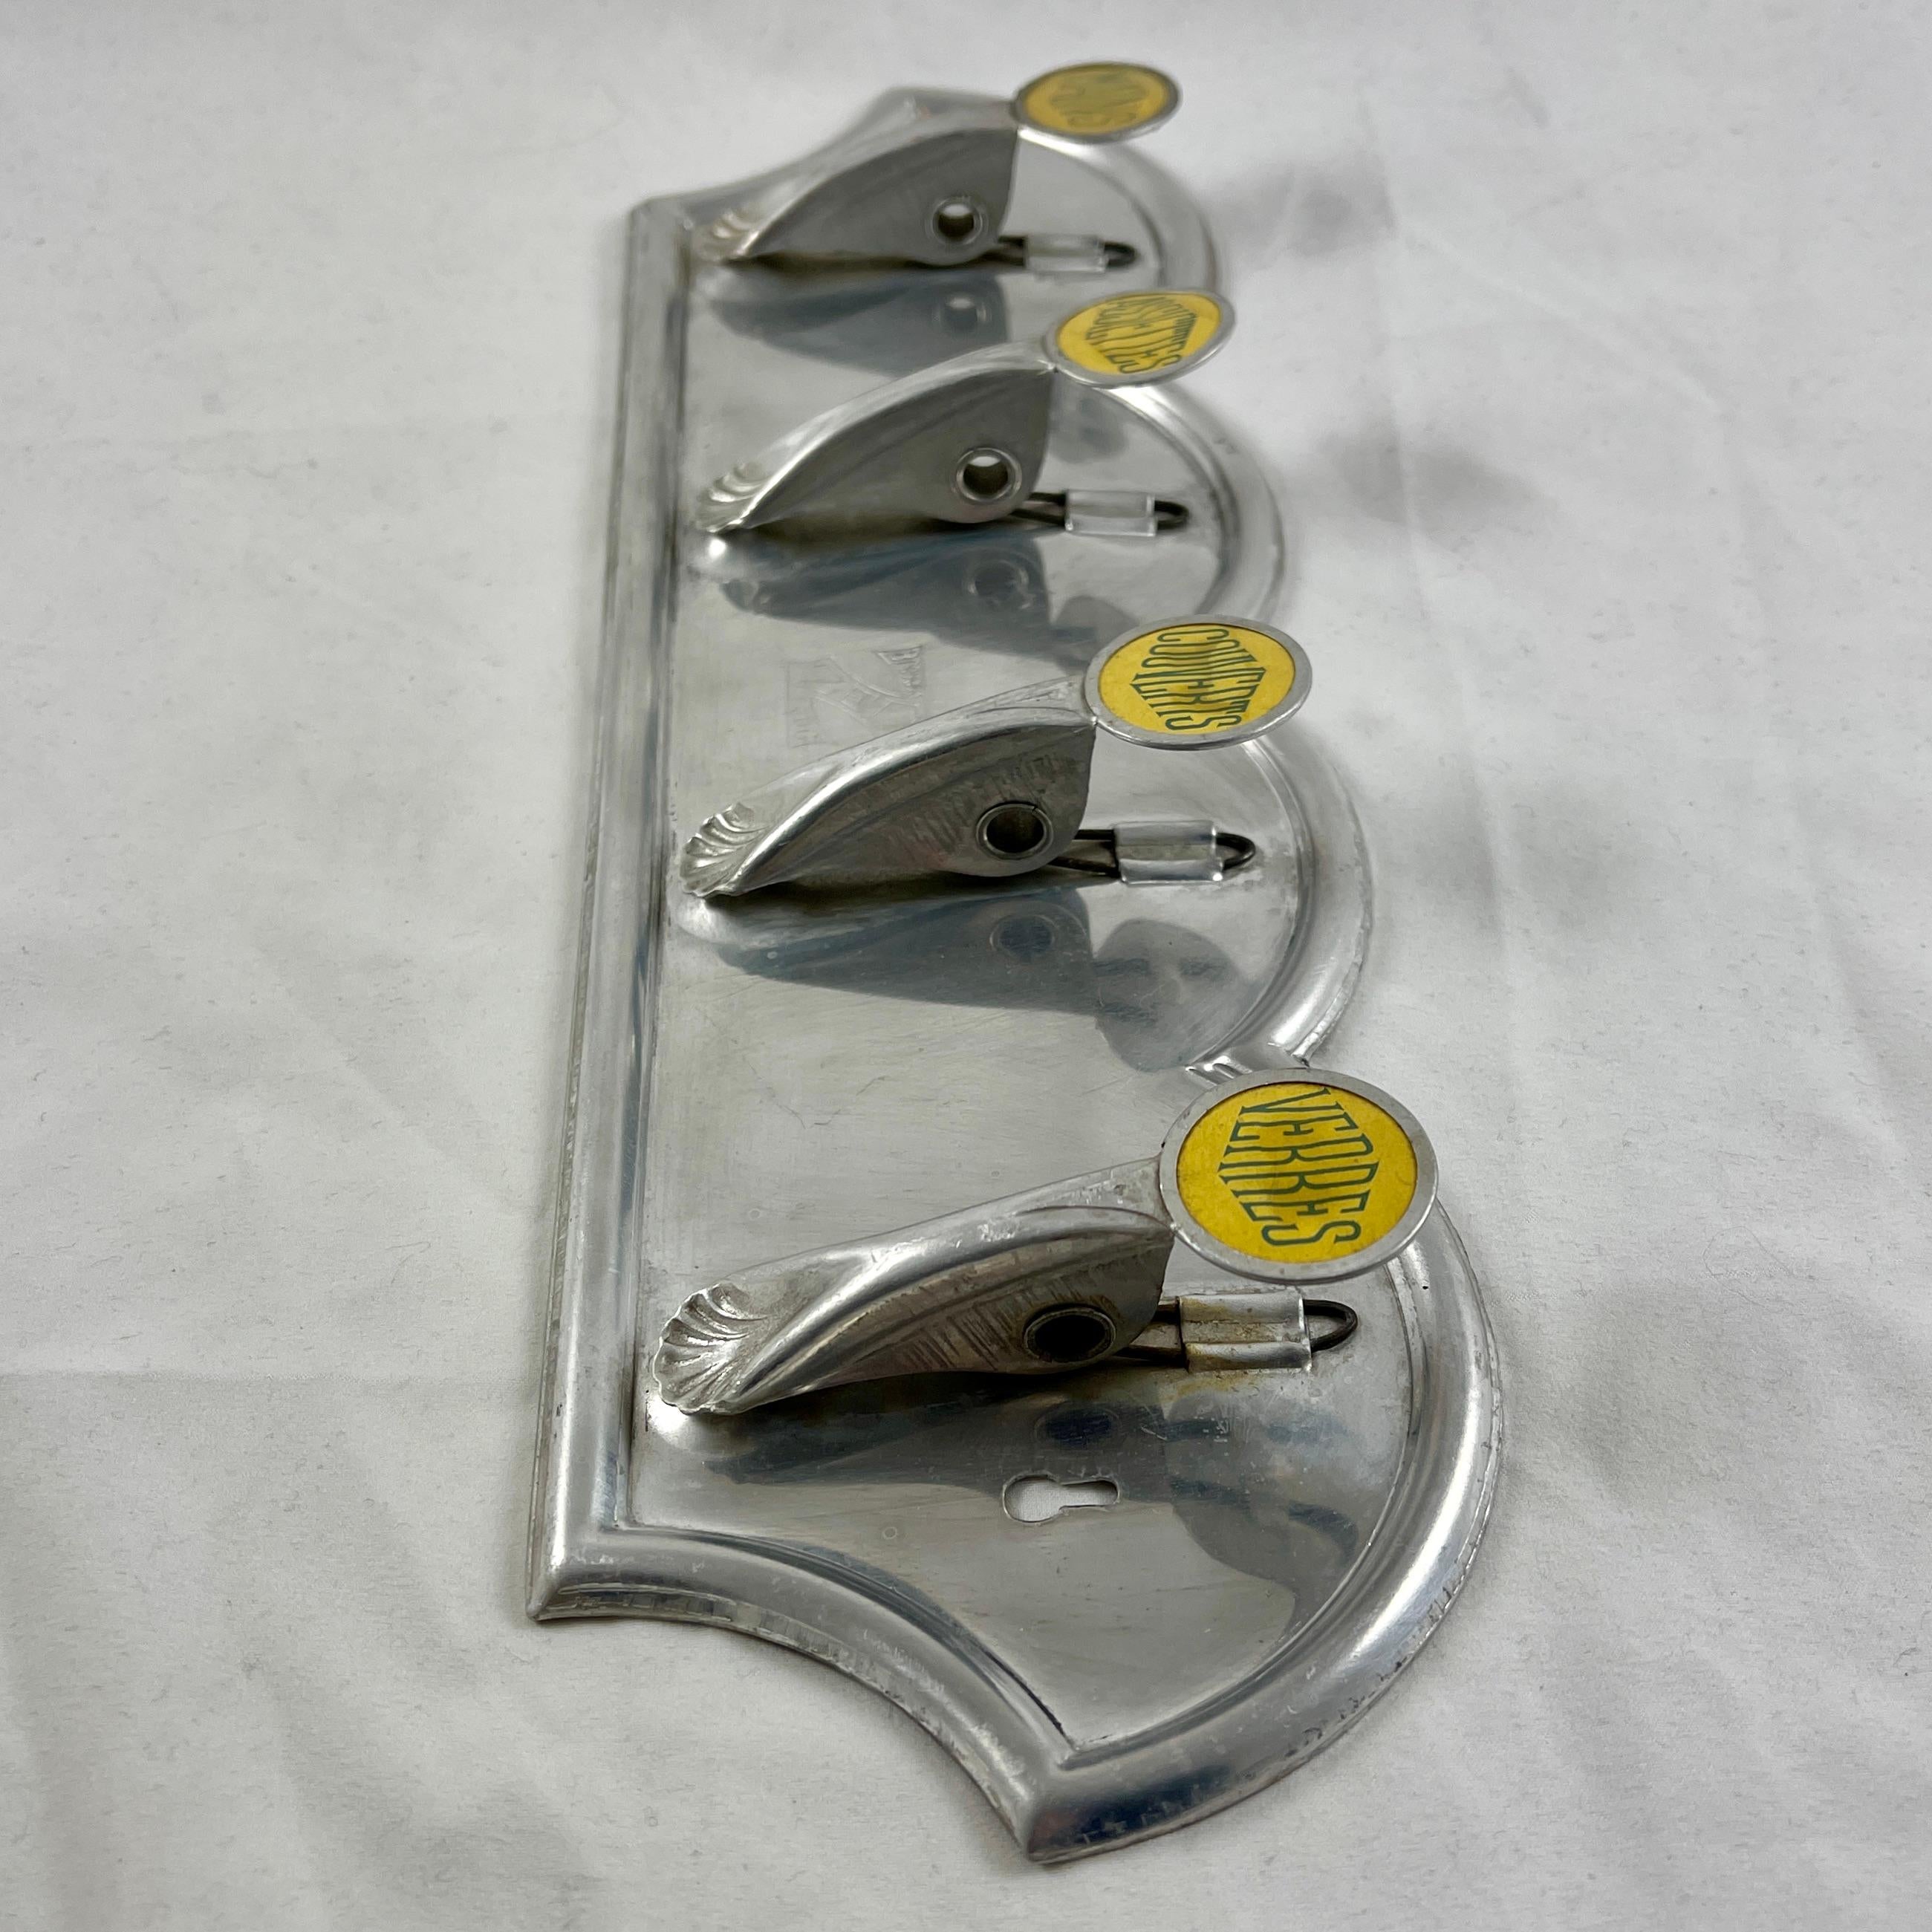 From the 1950s, a French kitchen dishcloth rack with spring loaded hooks for holding four towels, each marked for its own purpose.

Made of a shiny pressed aluminum, each holder showing a yellow and black printed label sealed under a heavy clear